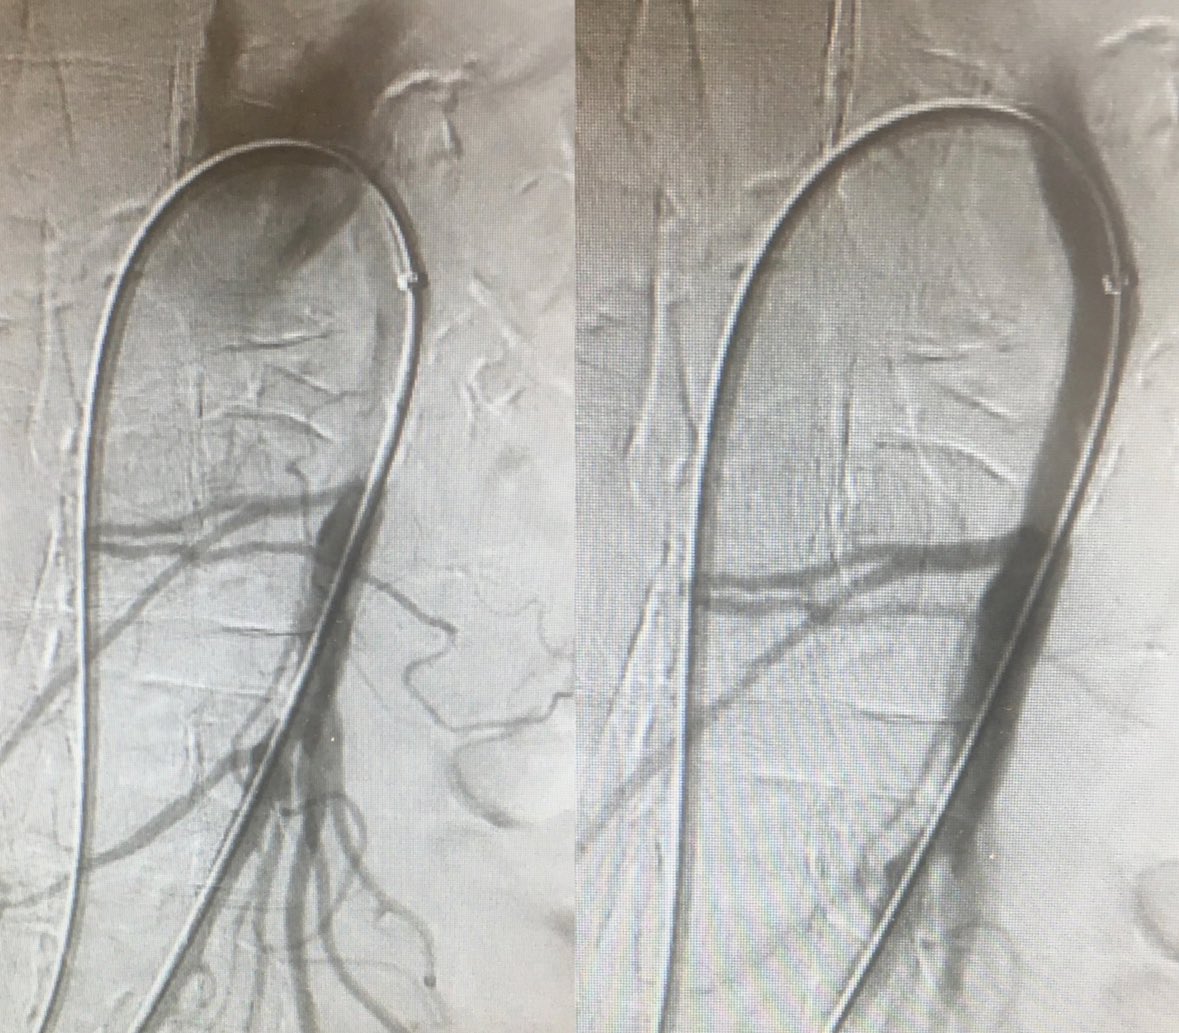 Thats an example of insitu thrombosis of SMA compared to the SMA embolus below (treated with endo thrombectomy and sma stenting of the plaque)